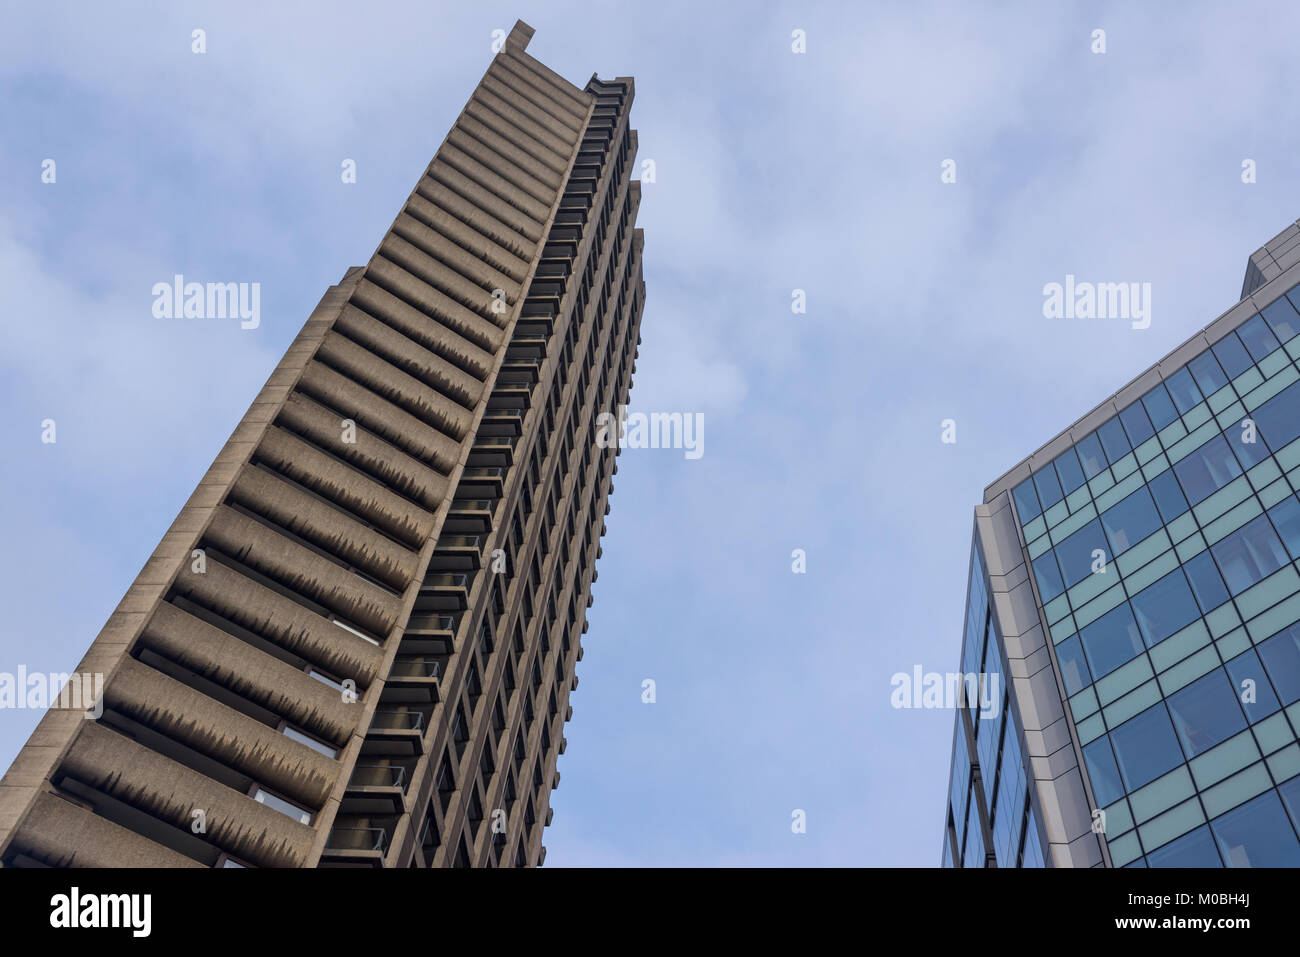 London, UK - January 2018. The Barbican Estate with its recognisable Brutalist architecture and residential skyscraper towers in London, UK. Stock Photo